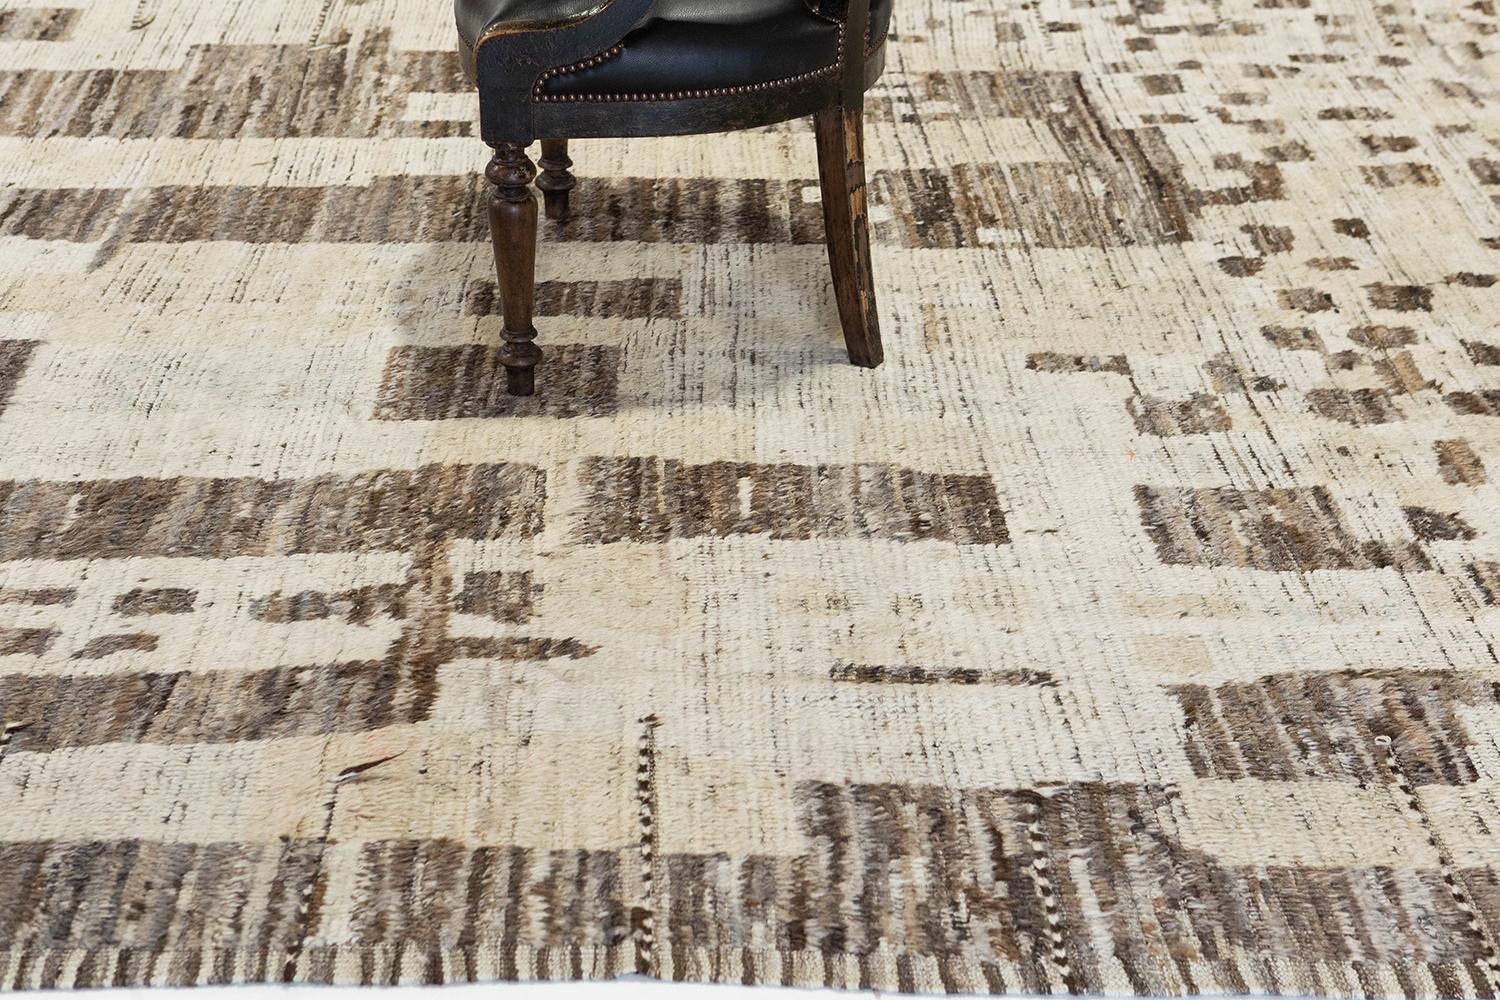 'Tetouan' is a beautifully textured wool shag combining unique design elements for the modern design world. Its weaving of natural earth tones and playfulness with shapes is suitable for many interiors and is what makes the Atlas Collection so